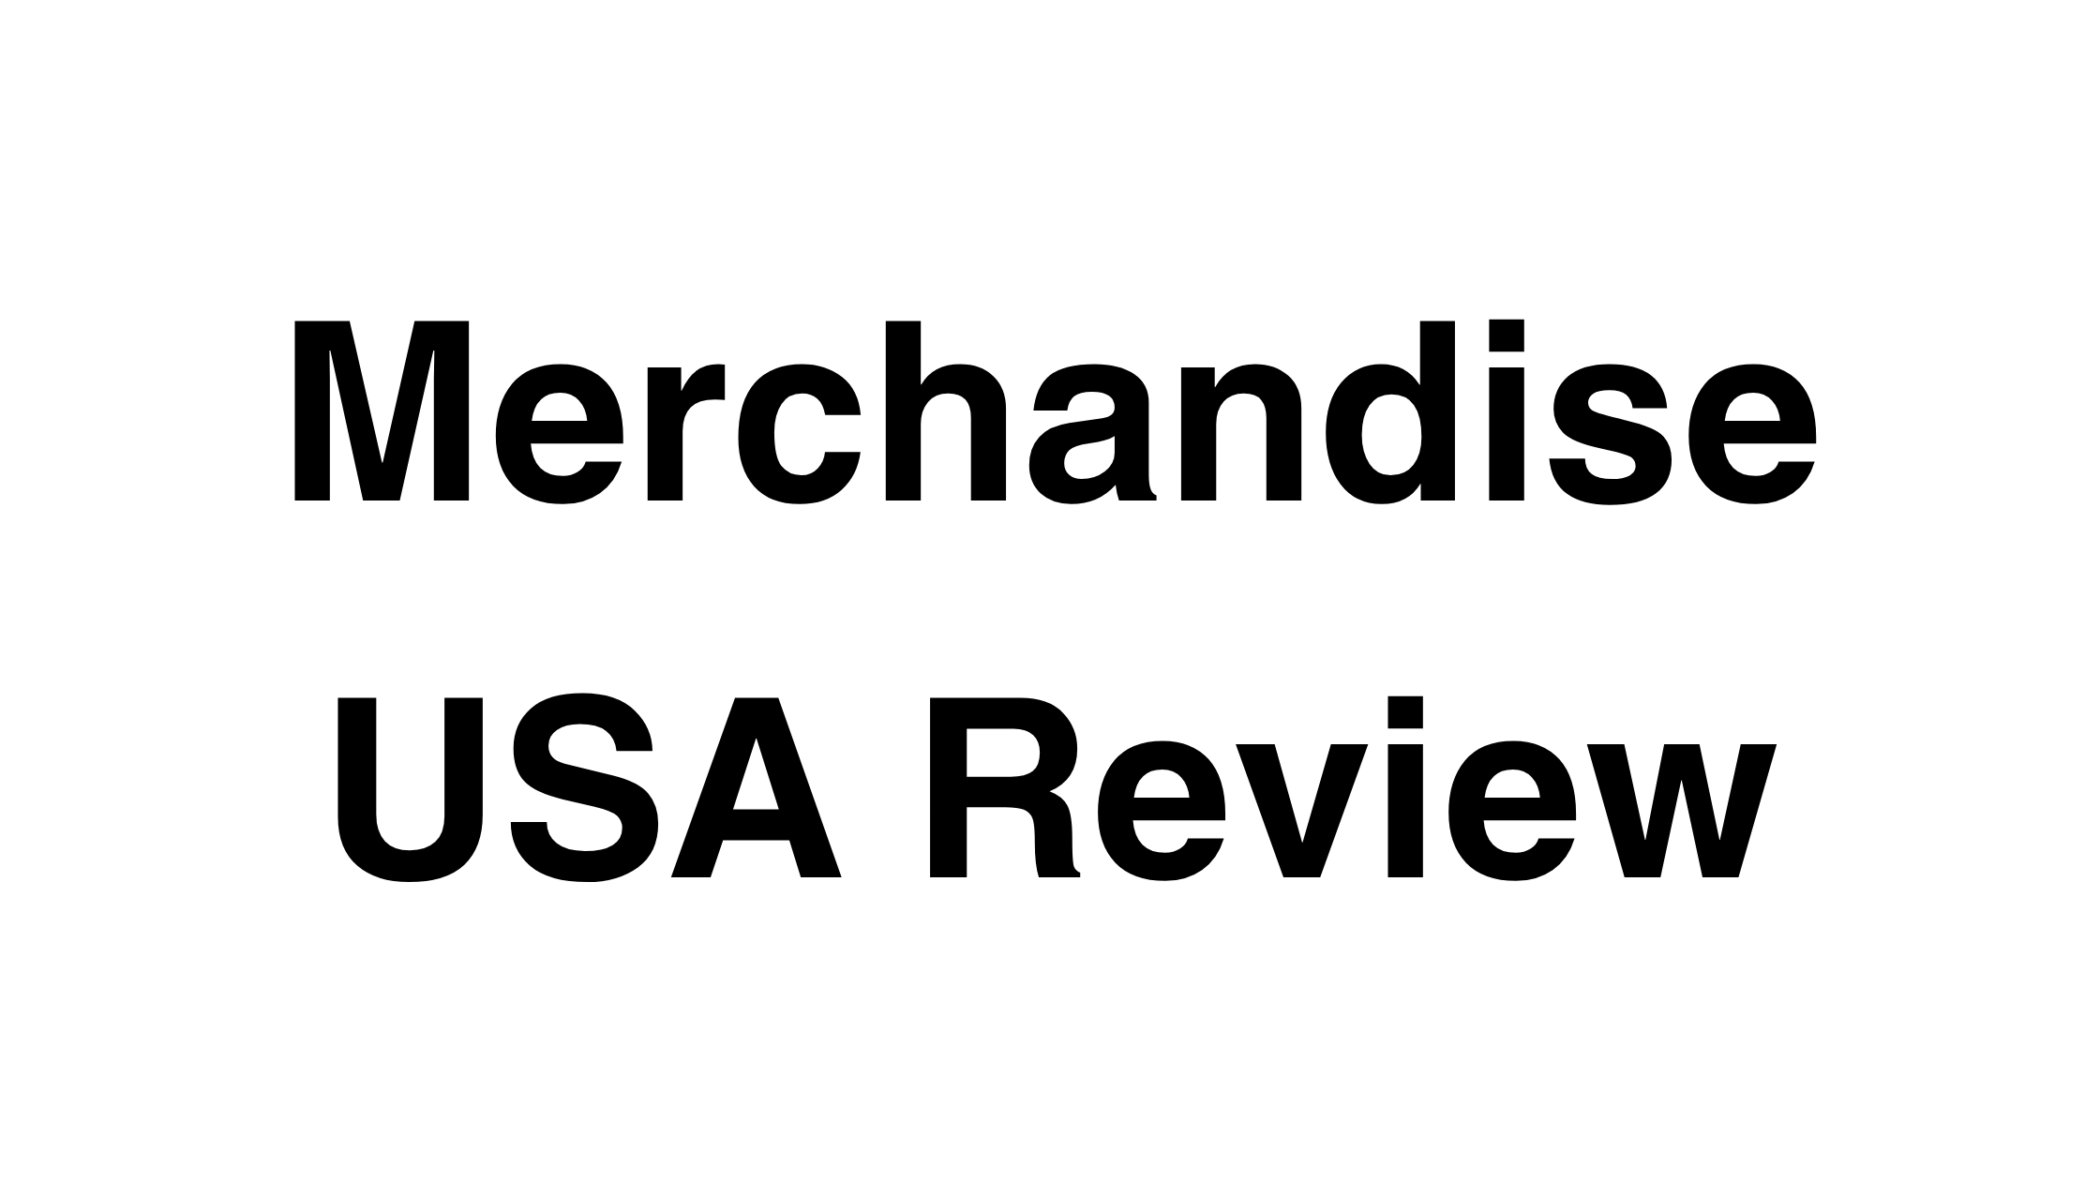 Merchandise USA Review